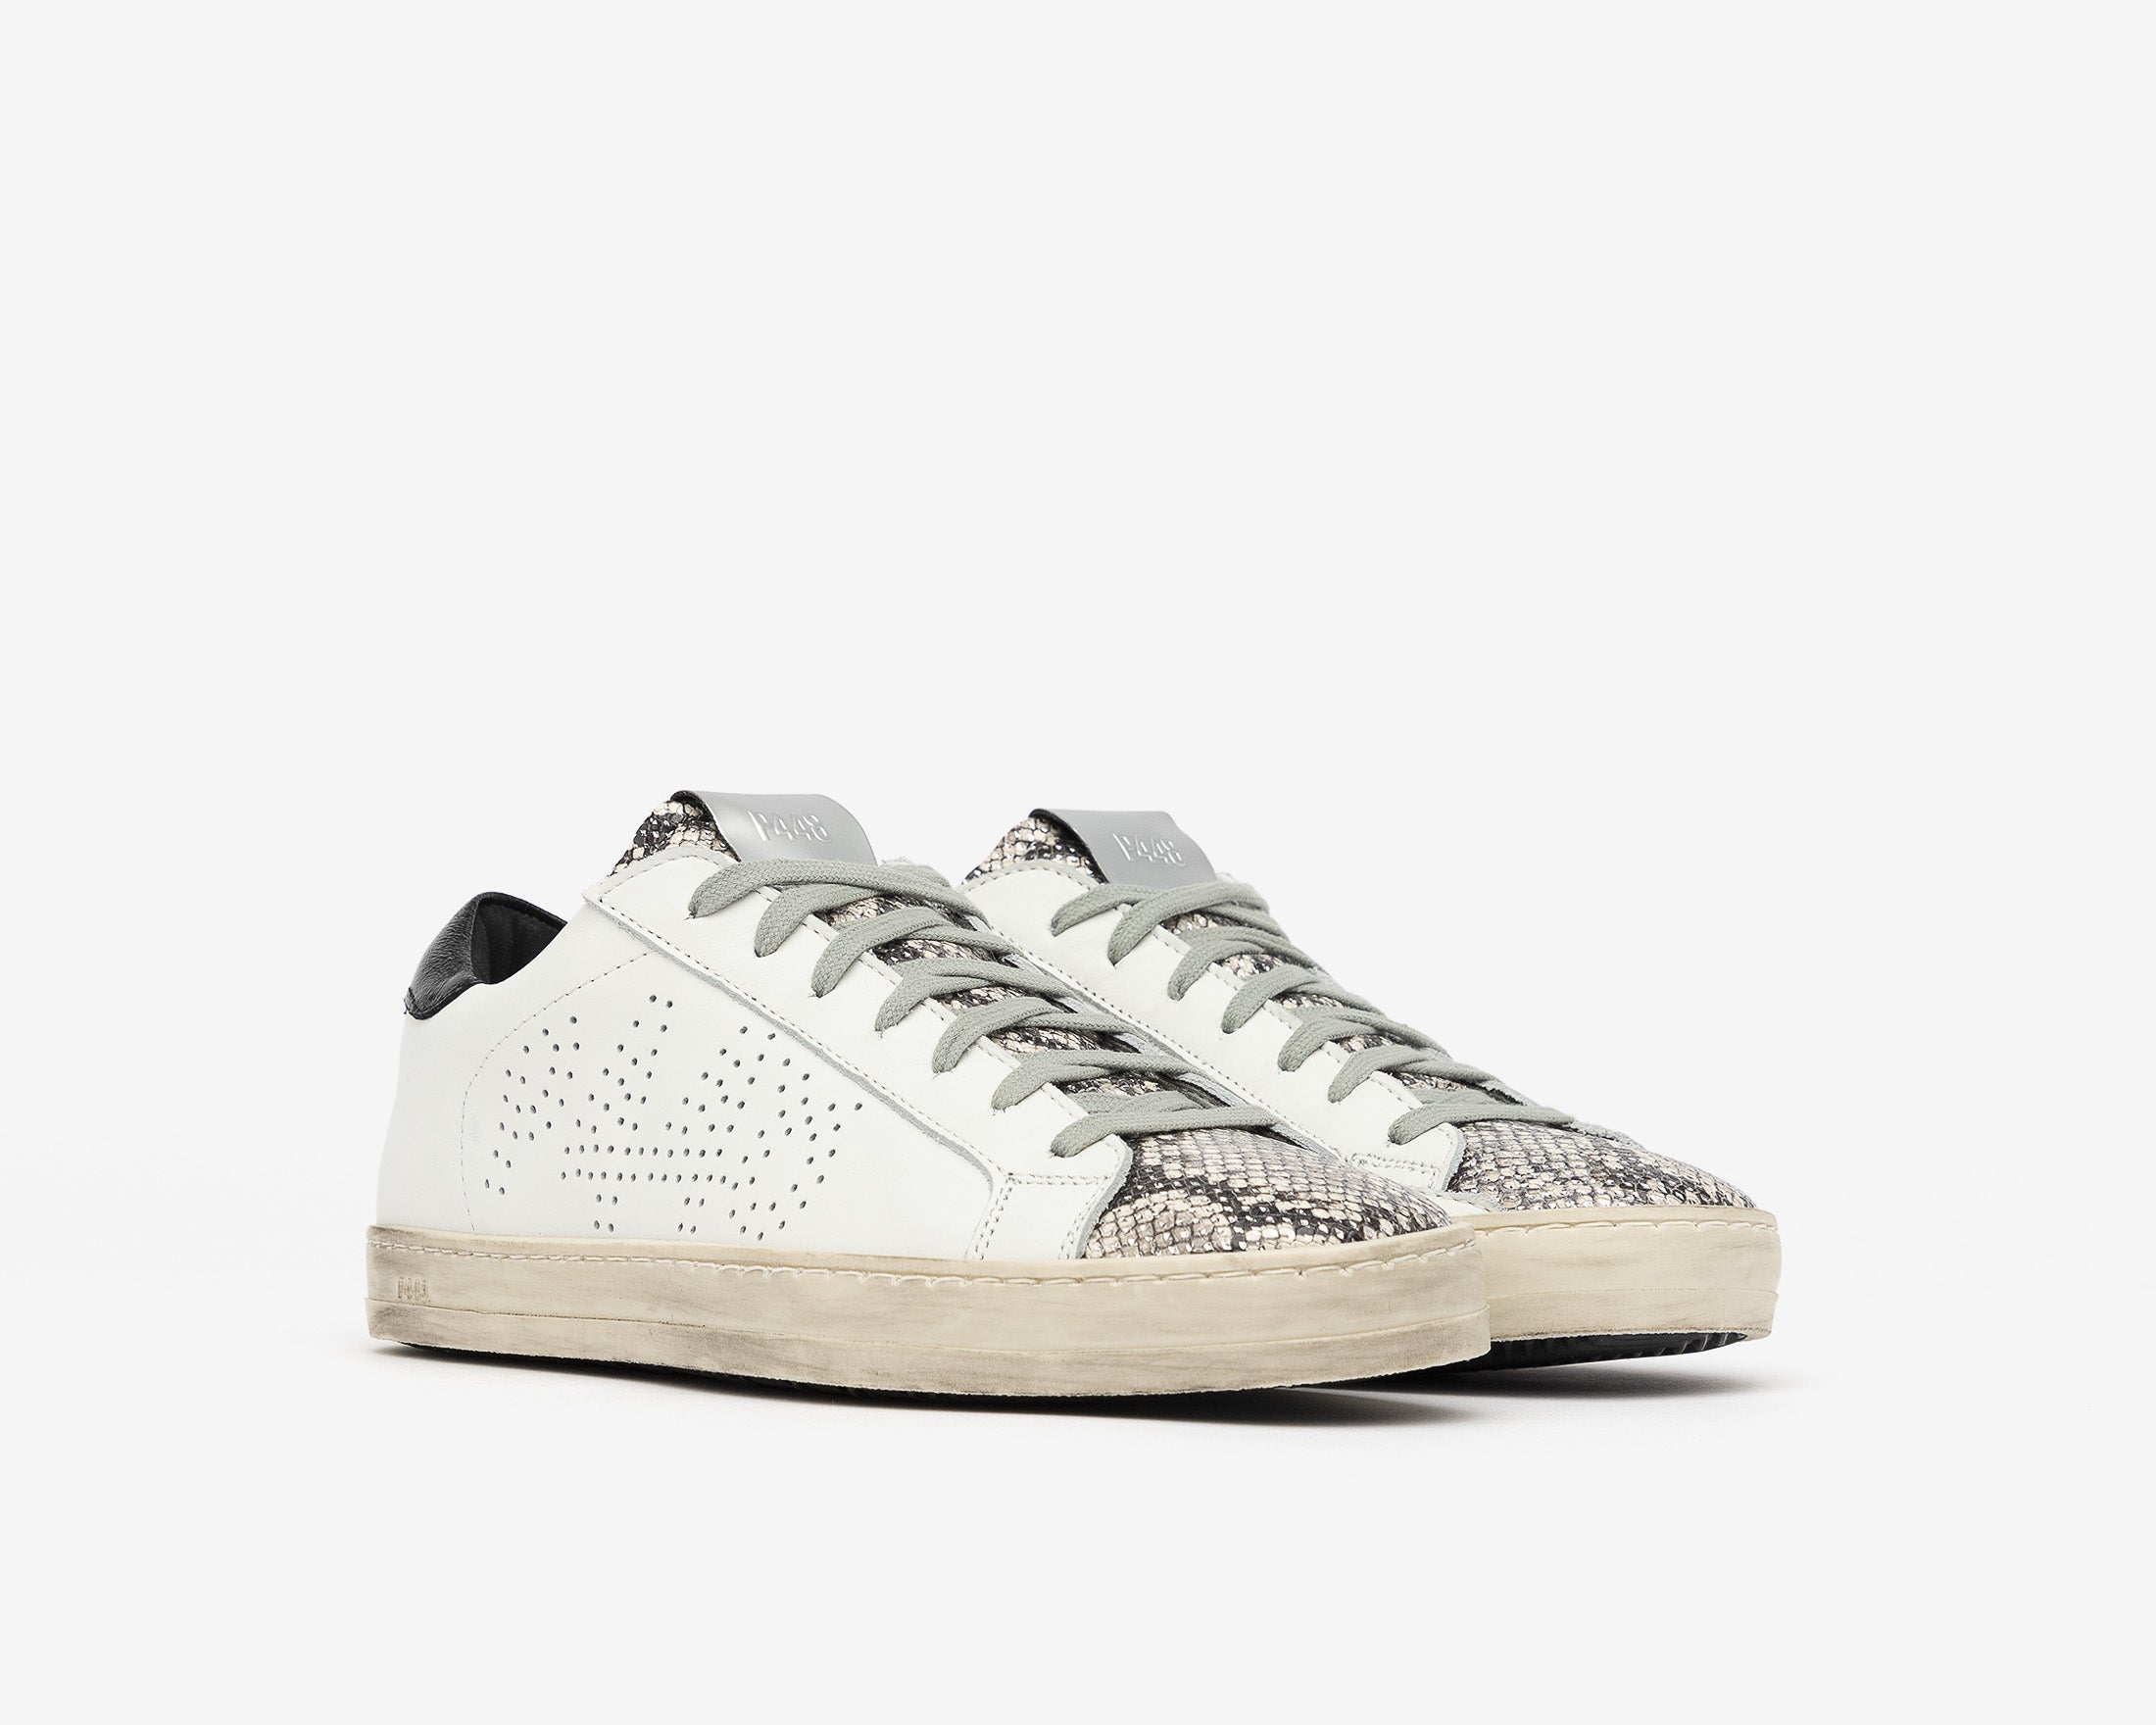 p448 silver sneakers